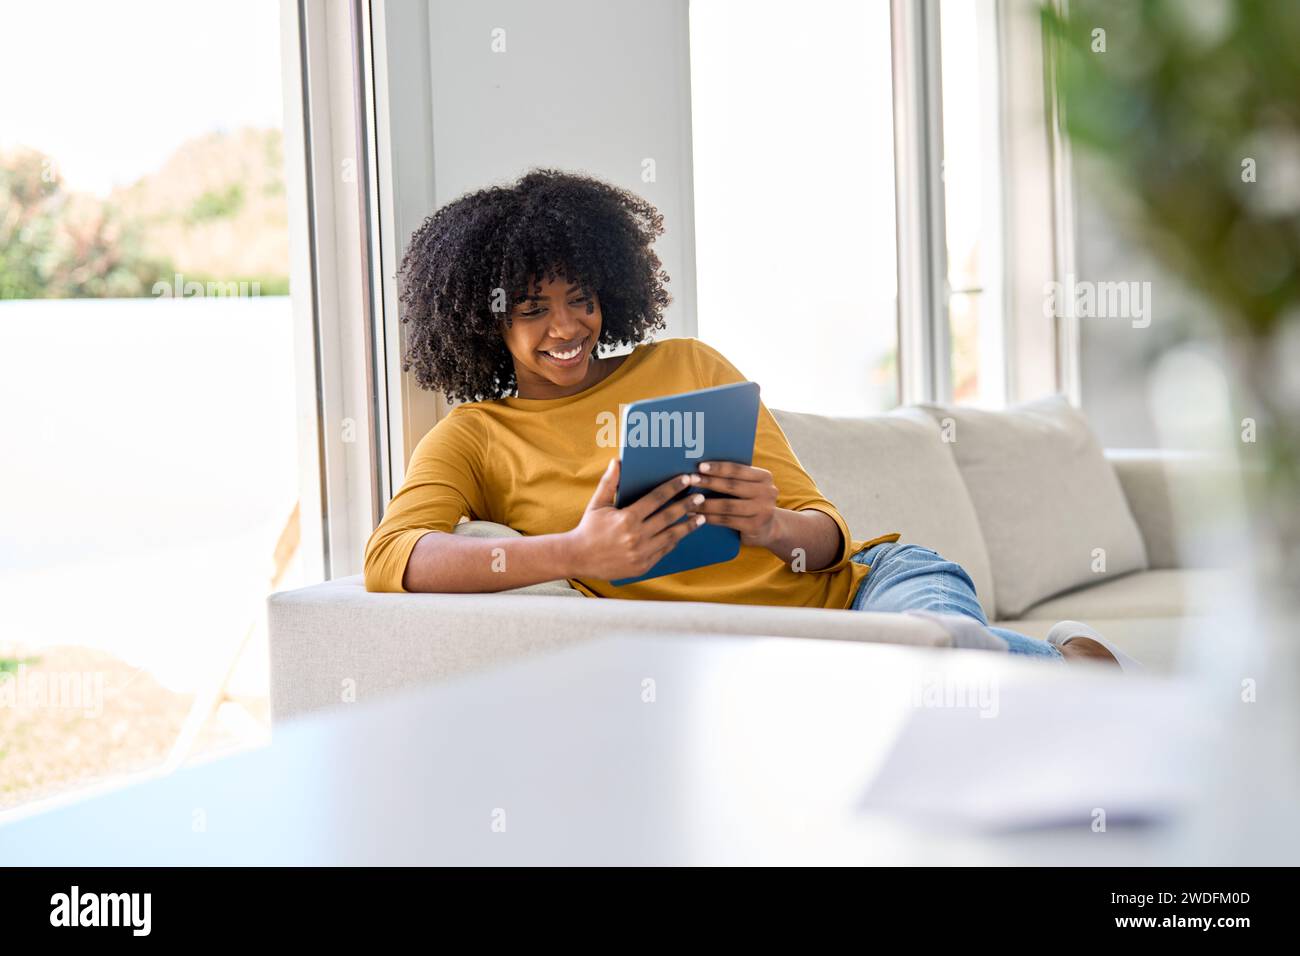 Smiling young African woman using digital tablet relaxing on couch at home. Stock Photo